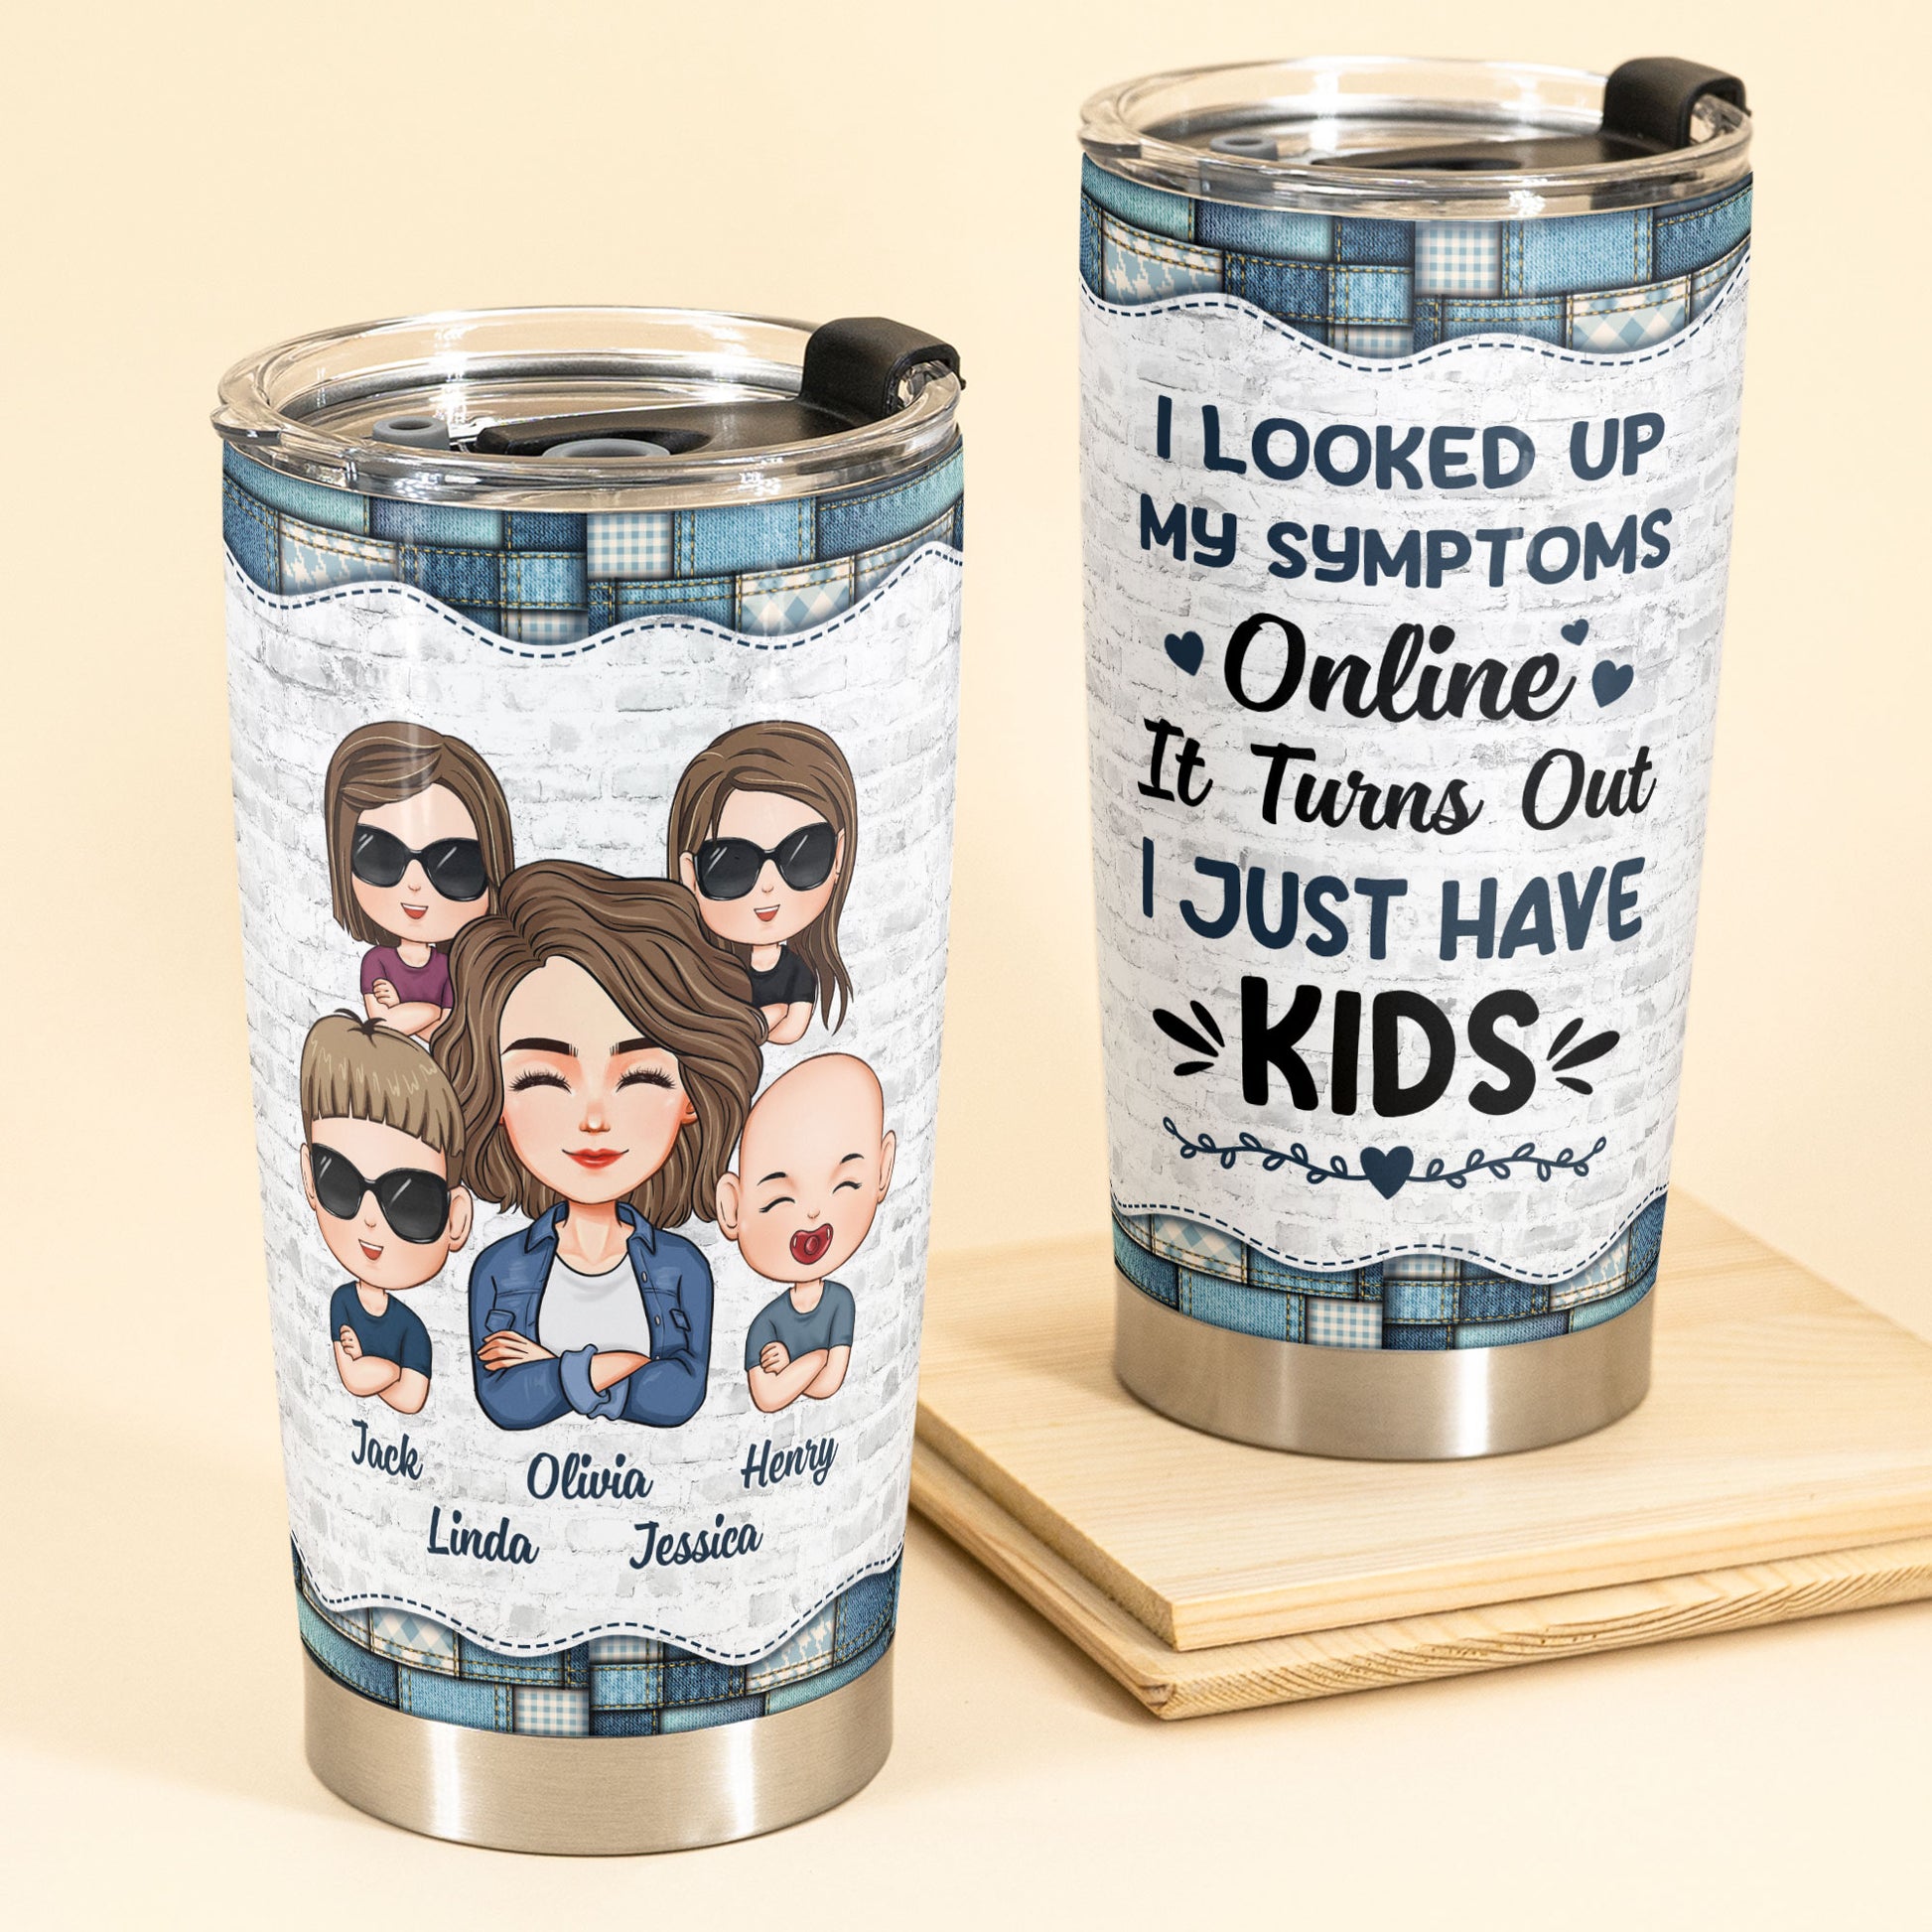 https://macorner.co/cdn/shop/products/Looked-Up-My-Symptoms-Turns-Out-I-Have-Kids-Personalized-Tumbler-Cup-MotherS-Day-Birthday-Loving-Gift-For-Mom-Mother-Mum-From-Daughter-Son-1_f9a7dd36-859f-4d79-8908-f22b26aad967.jpg?v=1677064016&width=1946